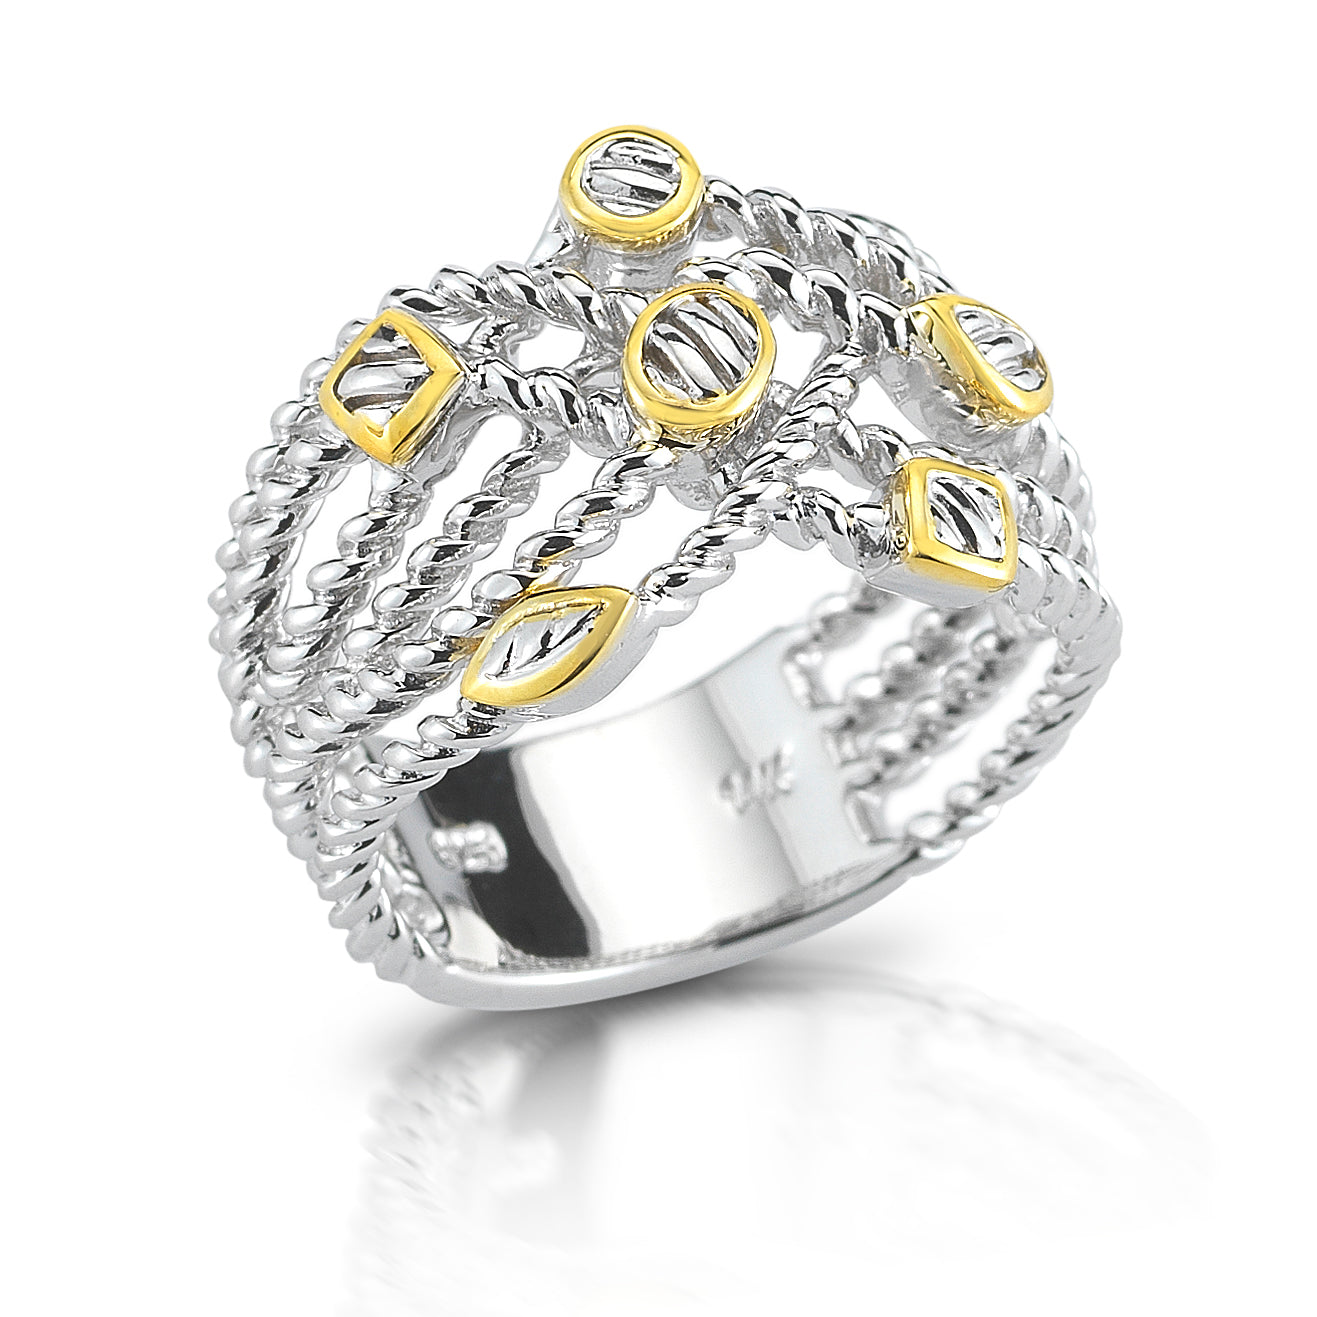 STERLING SILVER  CABLE DESIGN RING WITH 14K YELLOW GOLD BEZZELS.